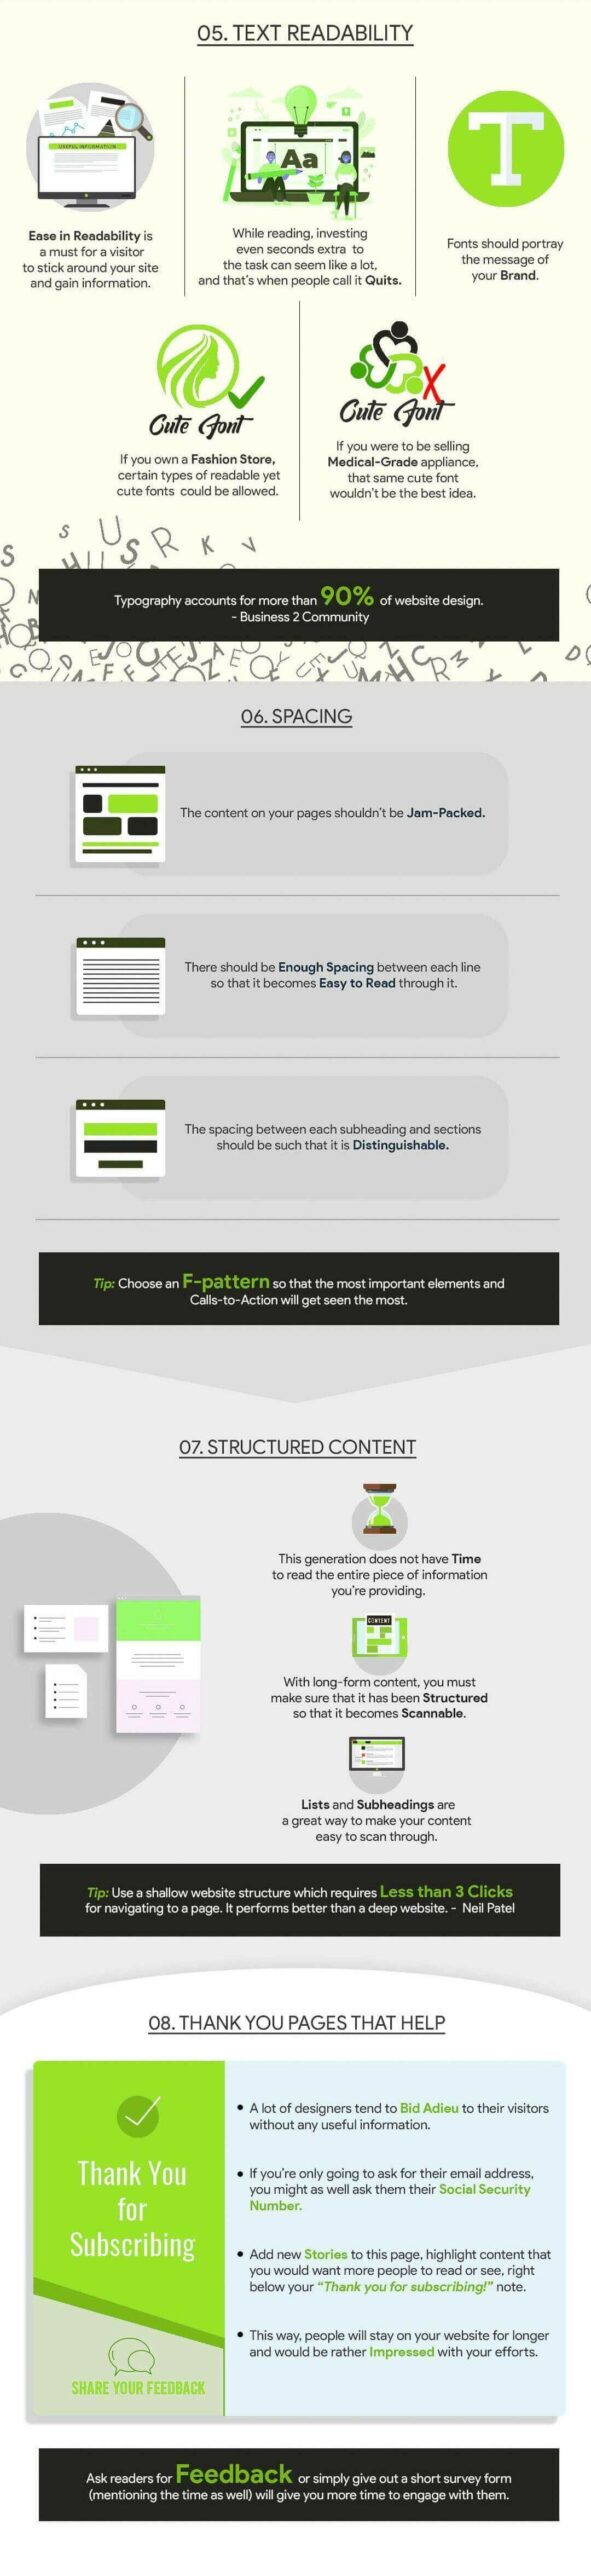 20 hacks Infographic 2 2 scaled